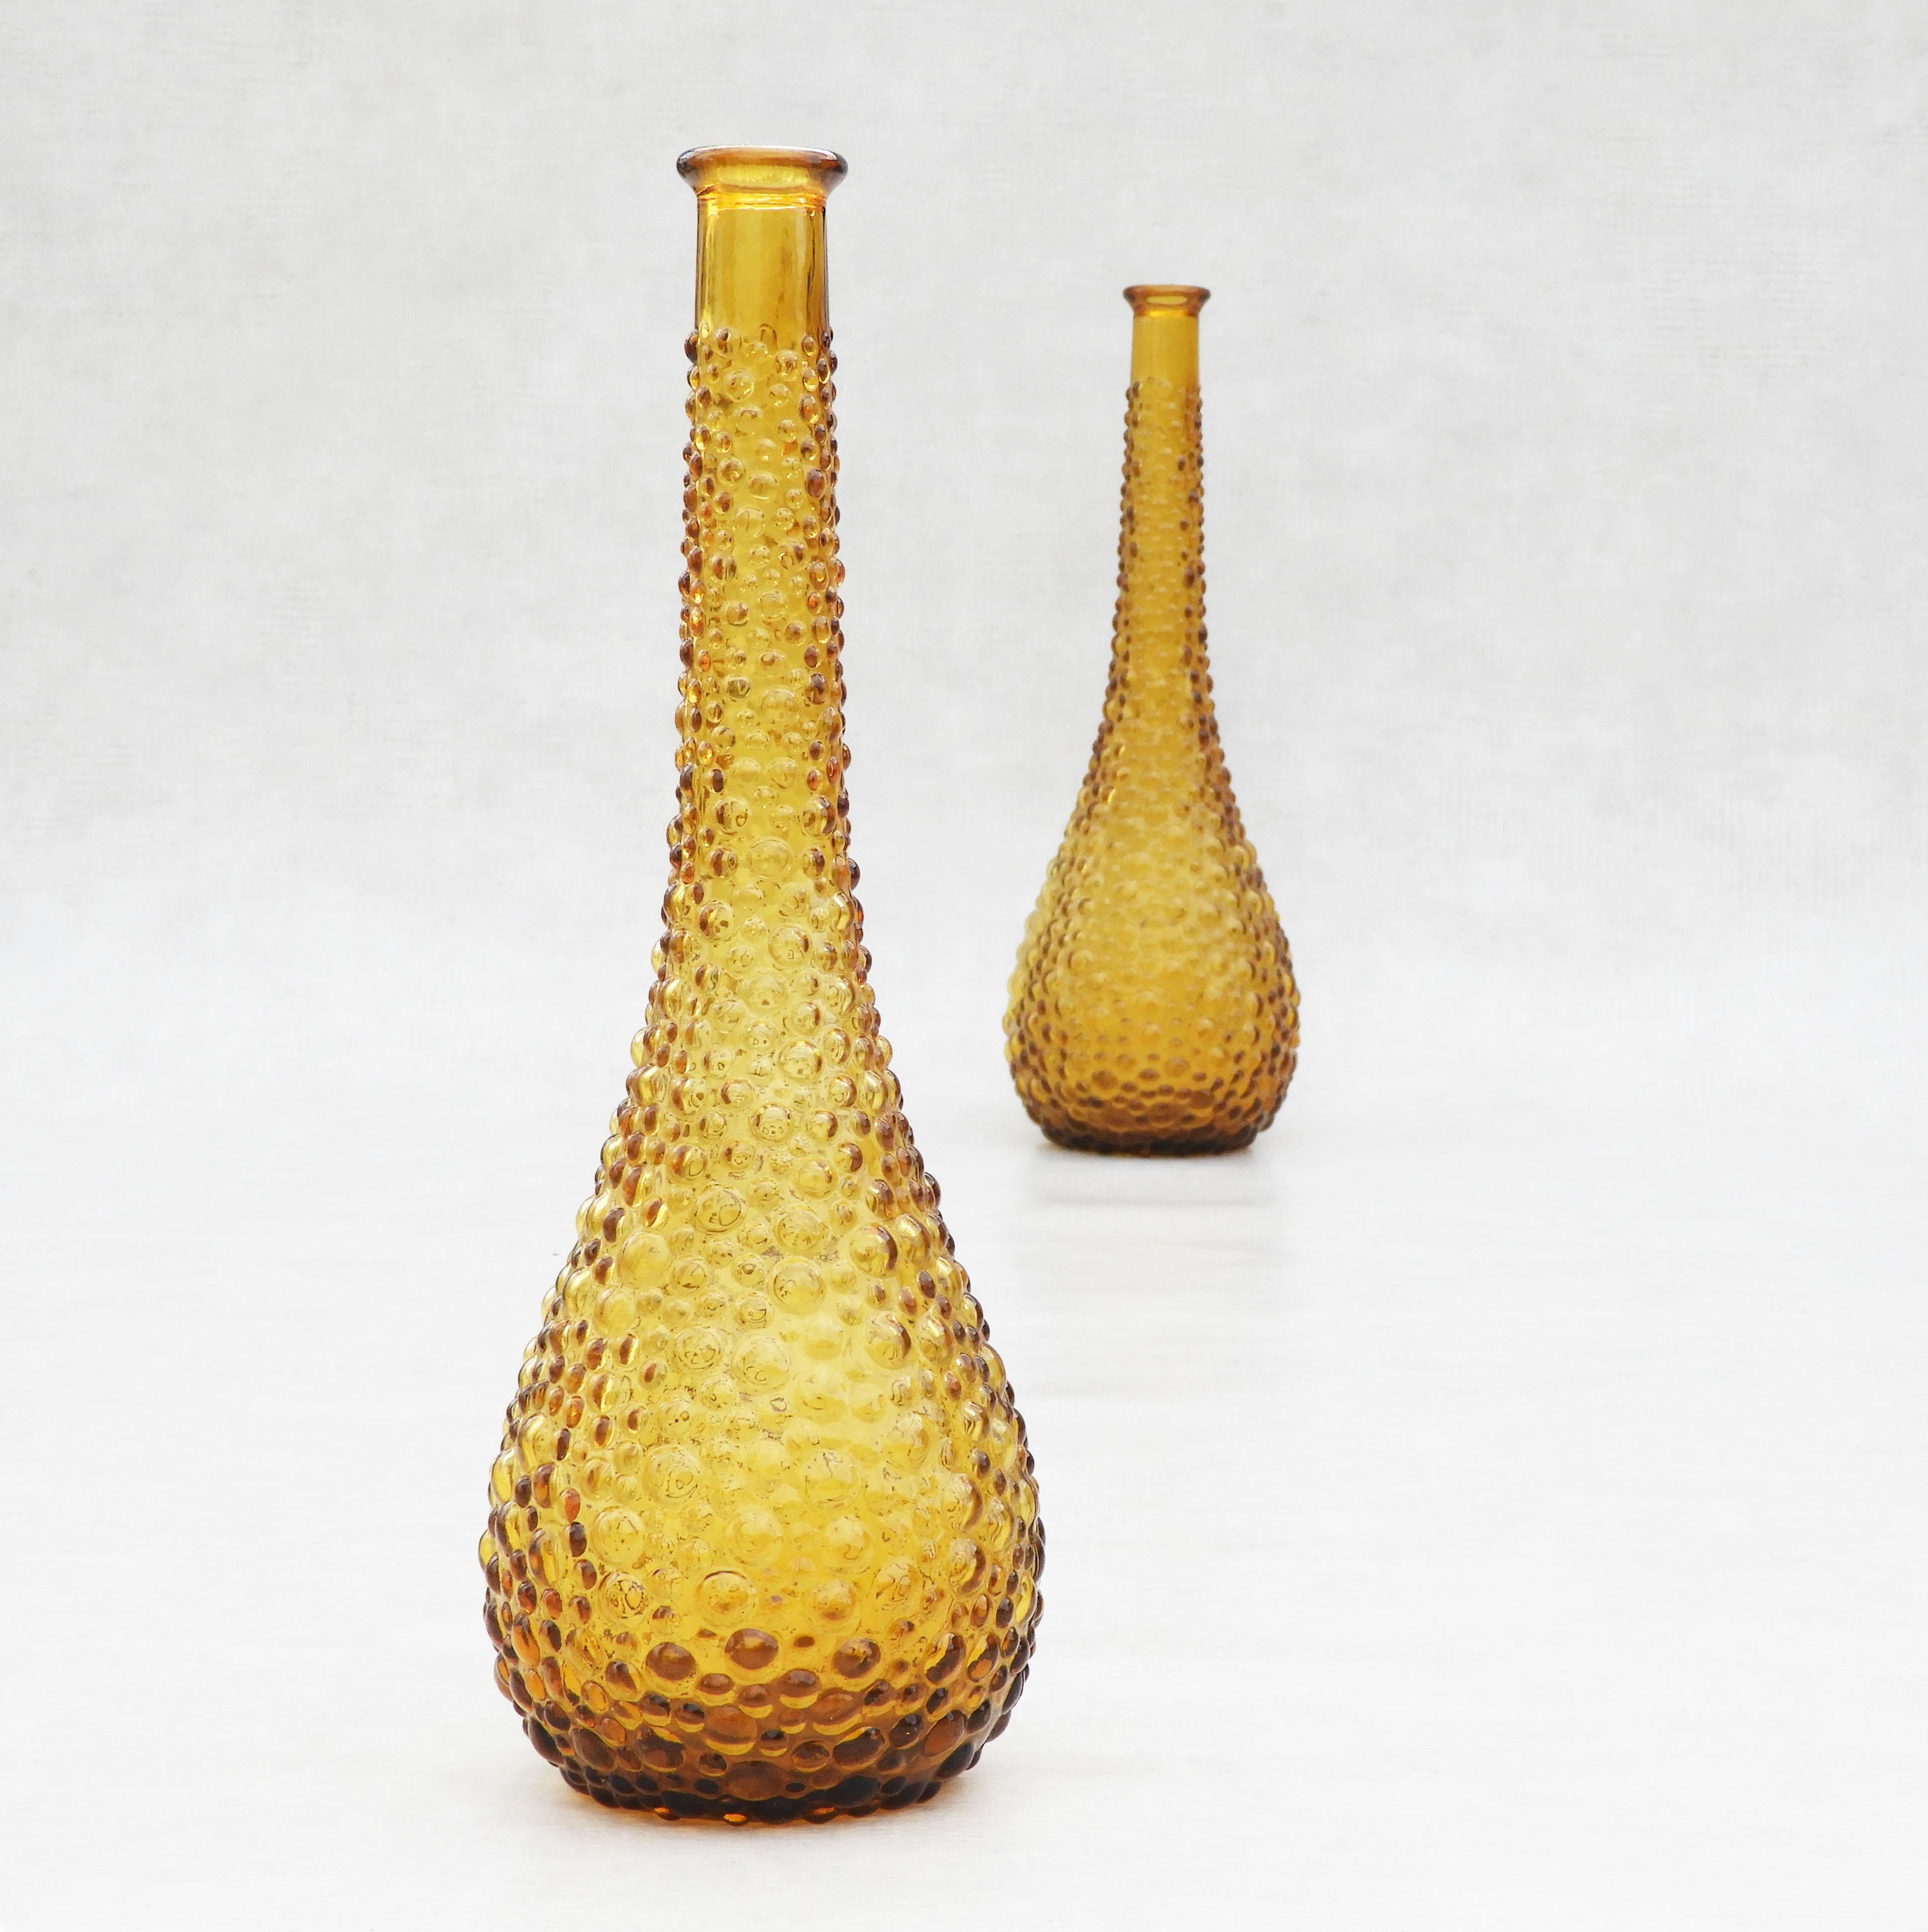 Vintage pair of stylish amber bubble glass bottle vases by Empoli, Italy, C1960. 
Attractive golden amber colouring and organic form textured bubble surface.
In very good vintage condition with no losses to glass.

Dimensions: Diameter: 5.9 in. (15